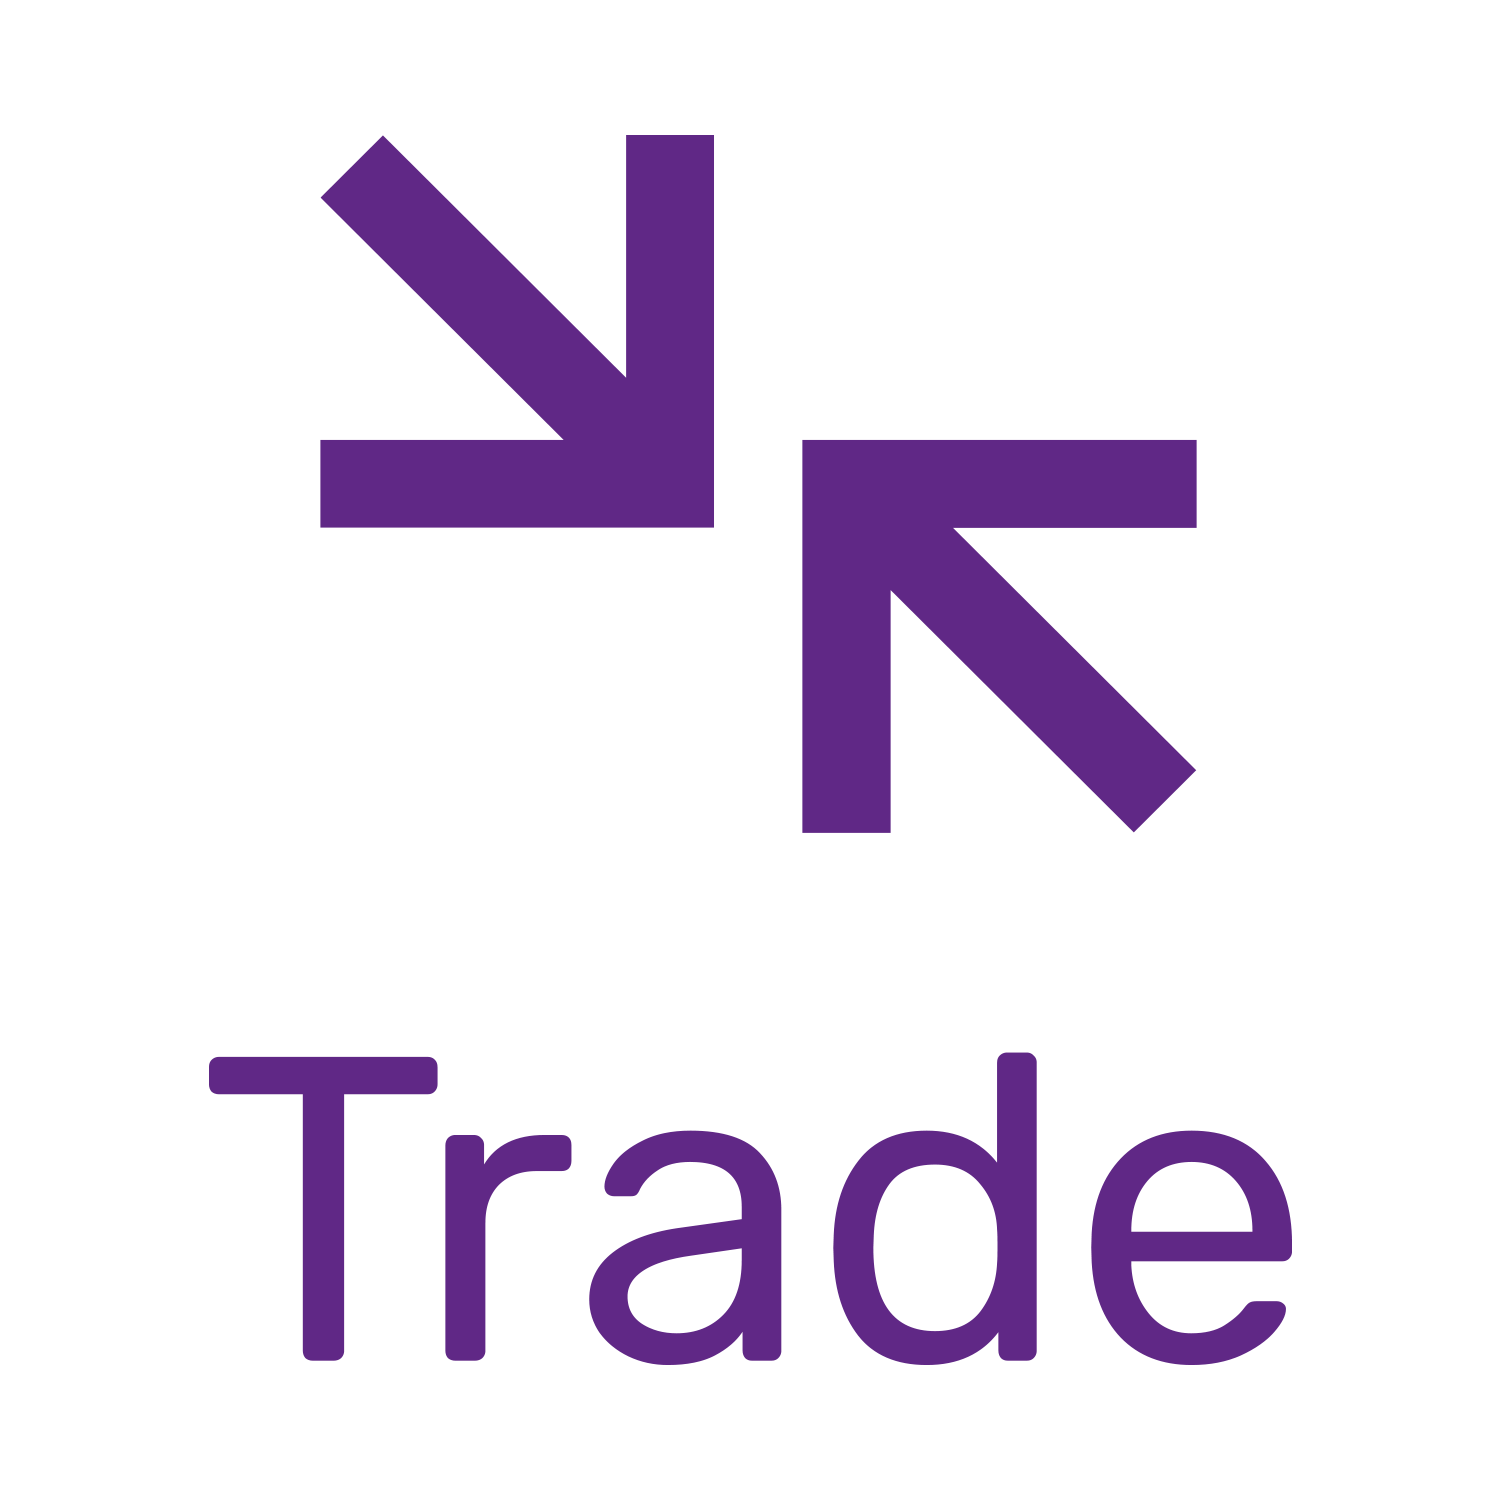 Trade.co (Fintech)
(exited)